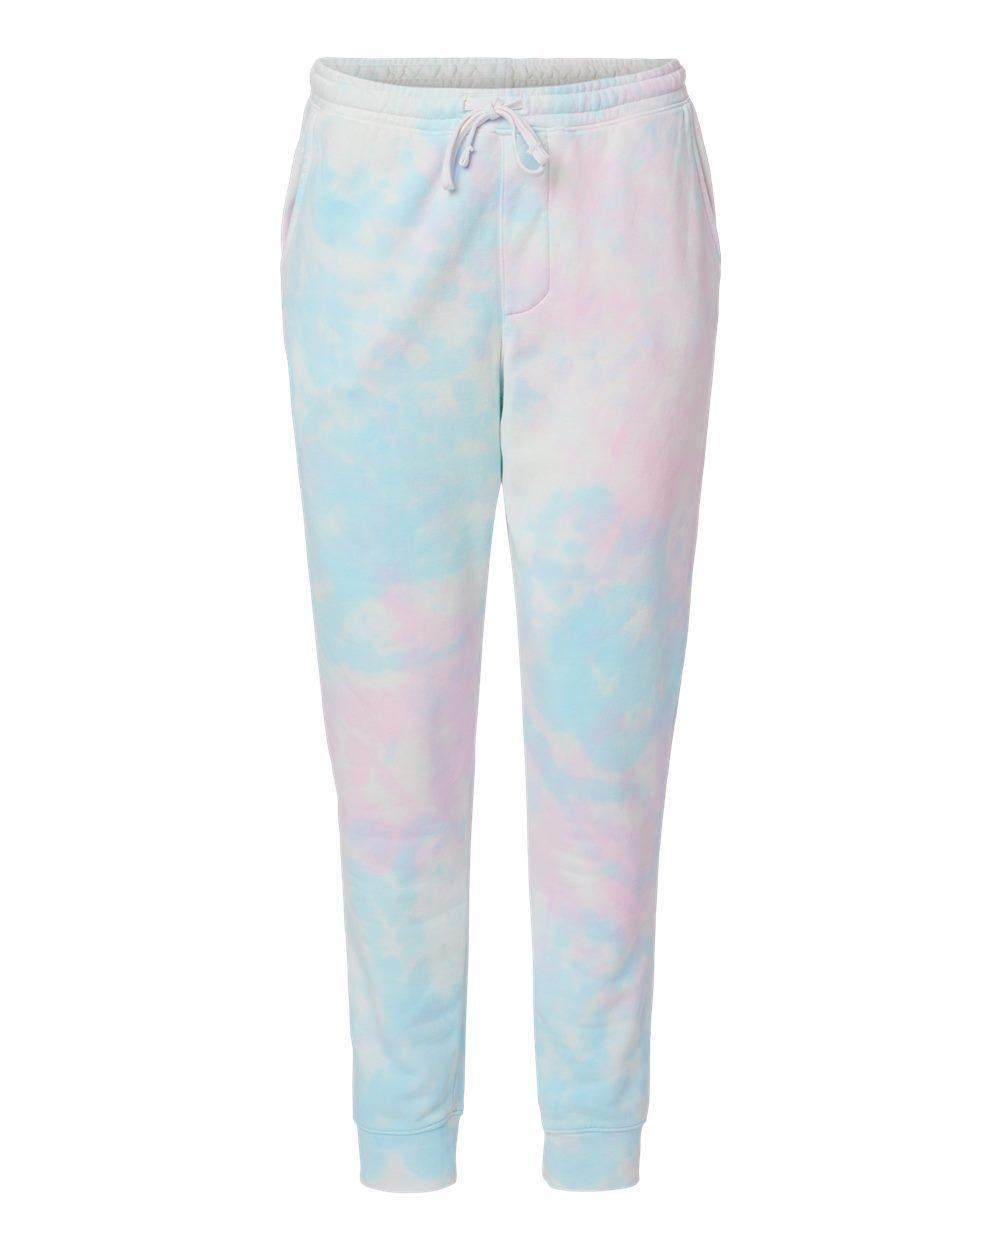 Blank Heavyweight Pigment Tie Dye Joggers - Constantly Create Shop